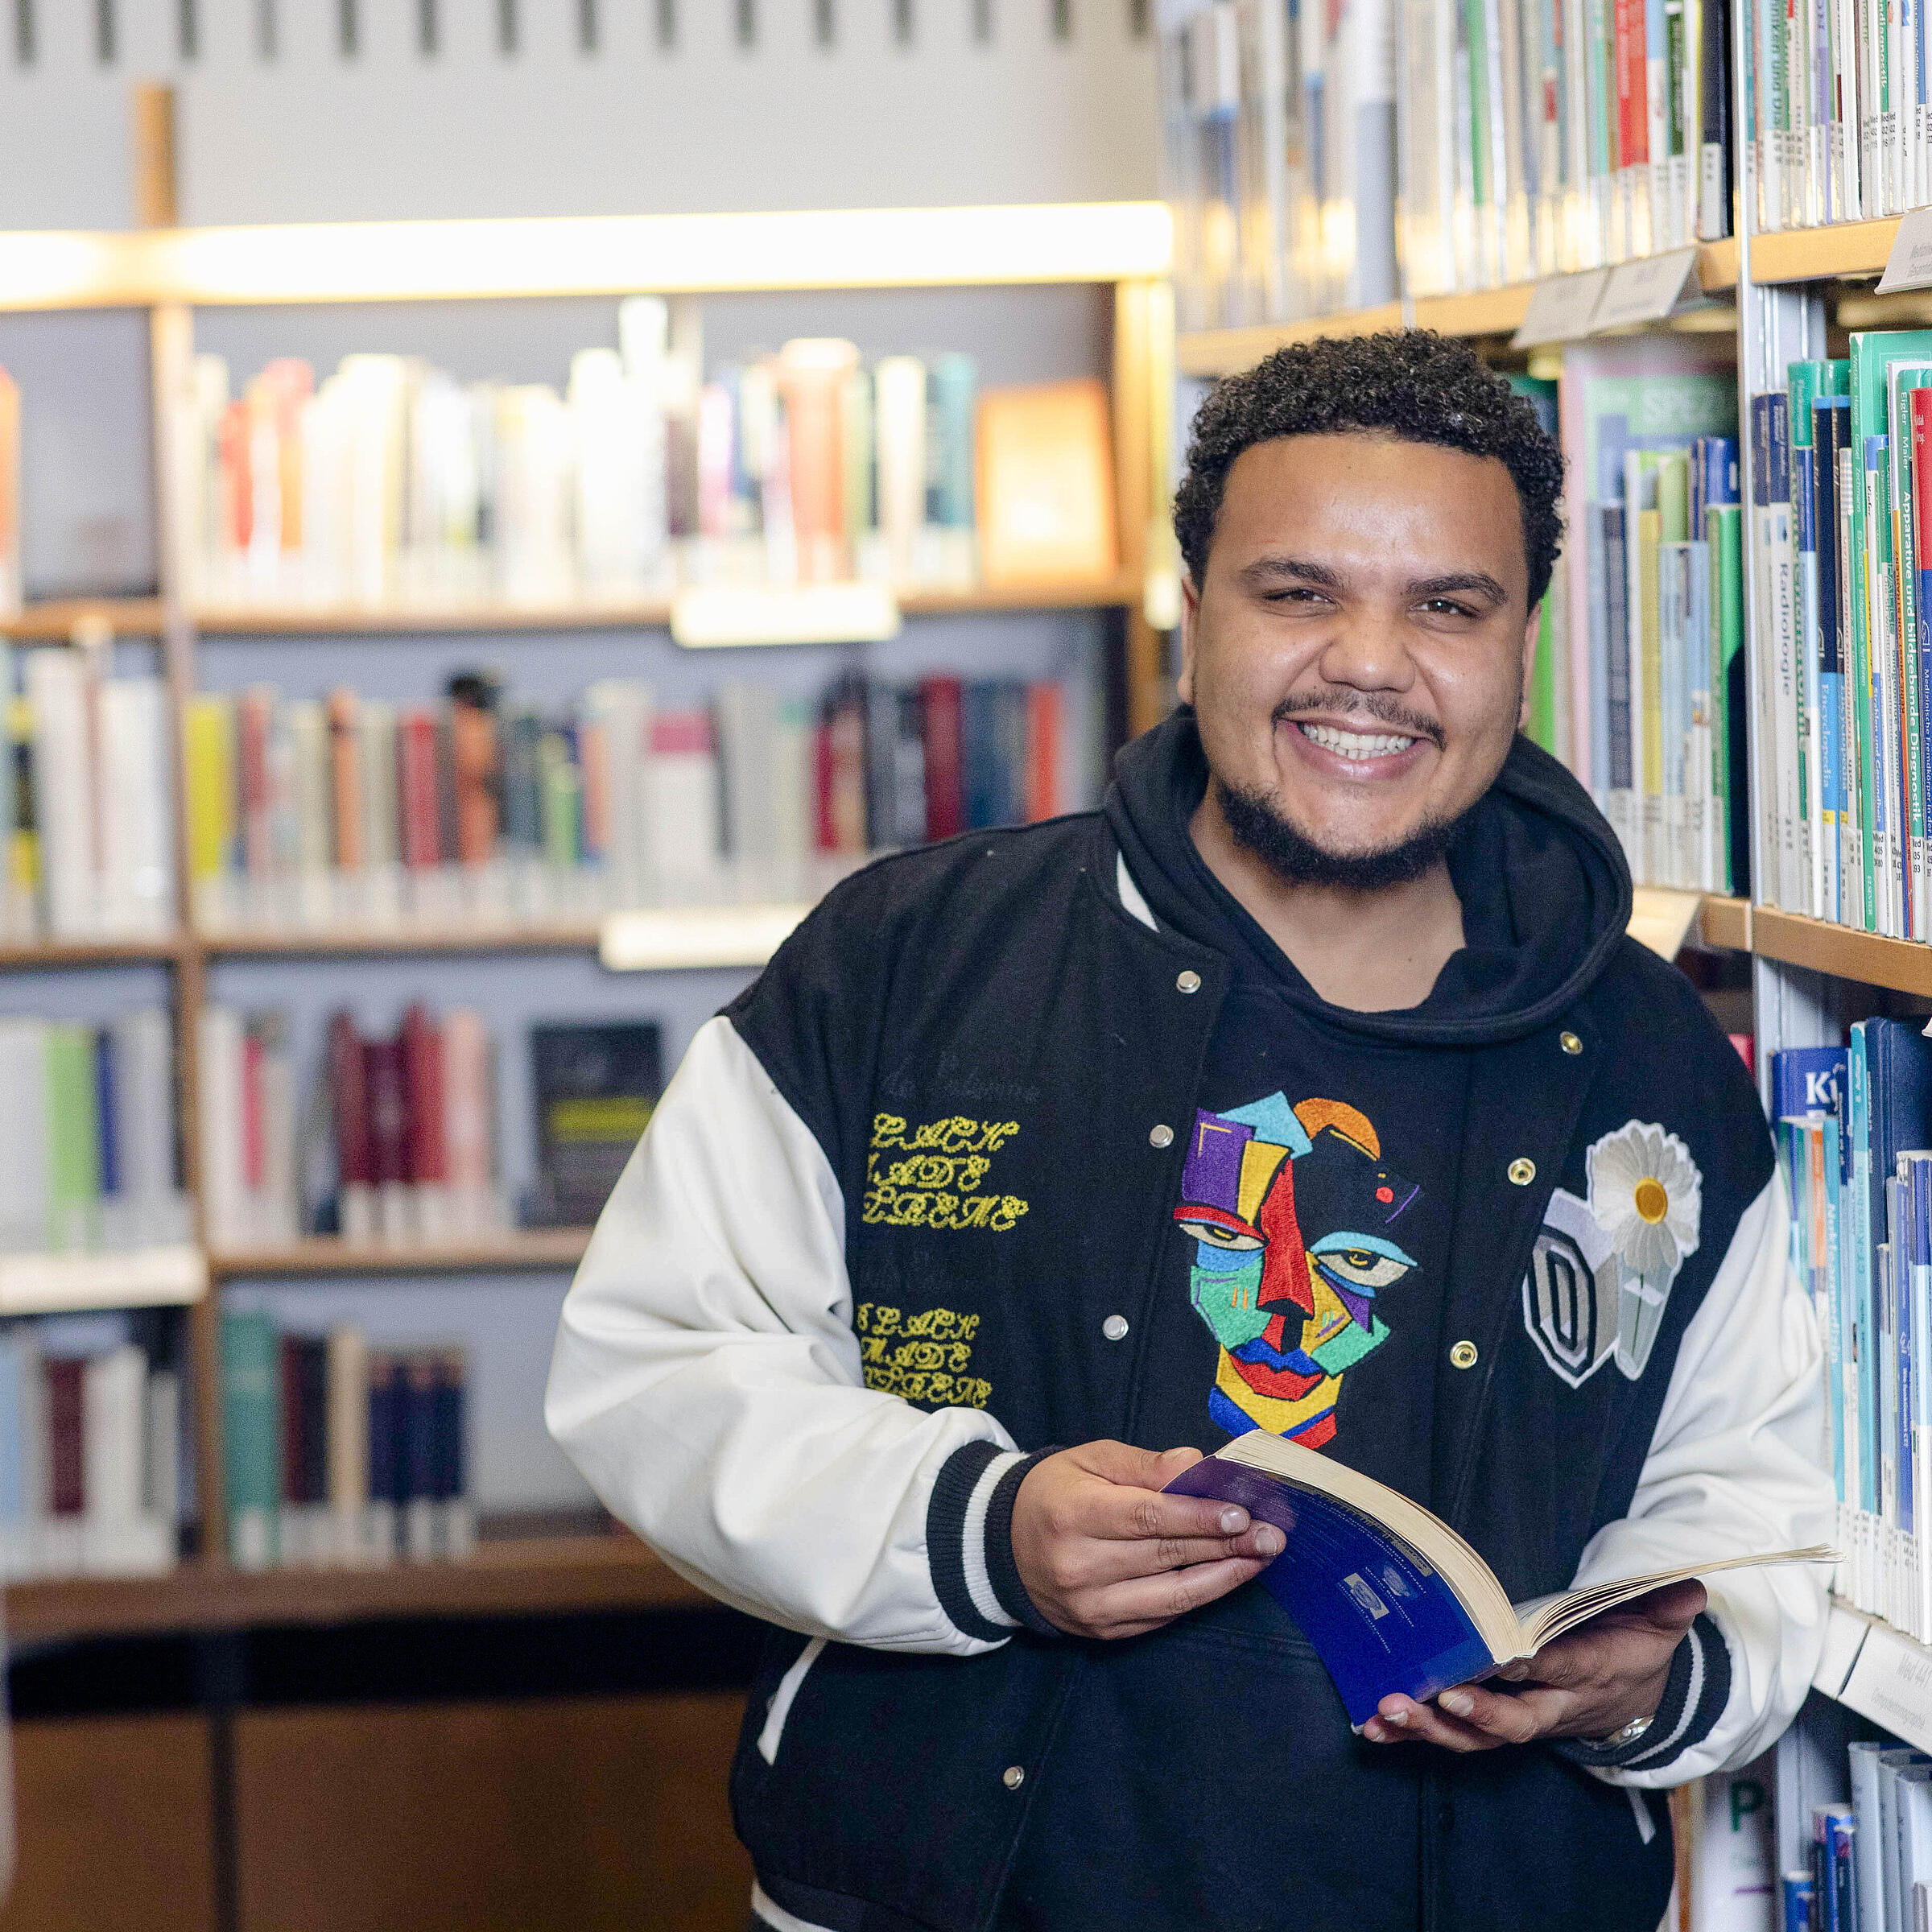 Young man stands with opened bestseller non-fiction book in front of shelf in BStB